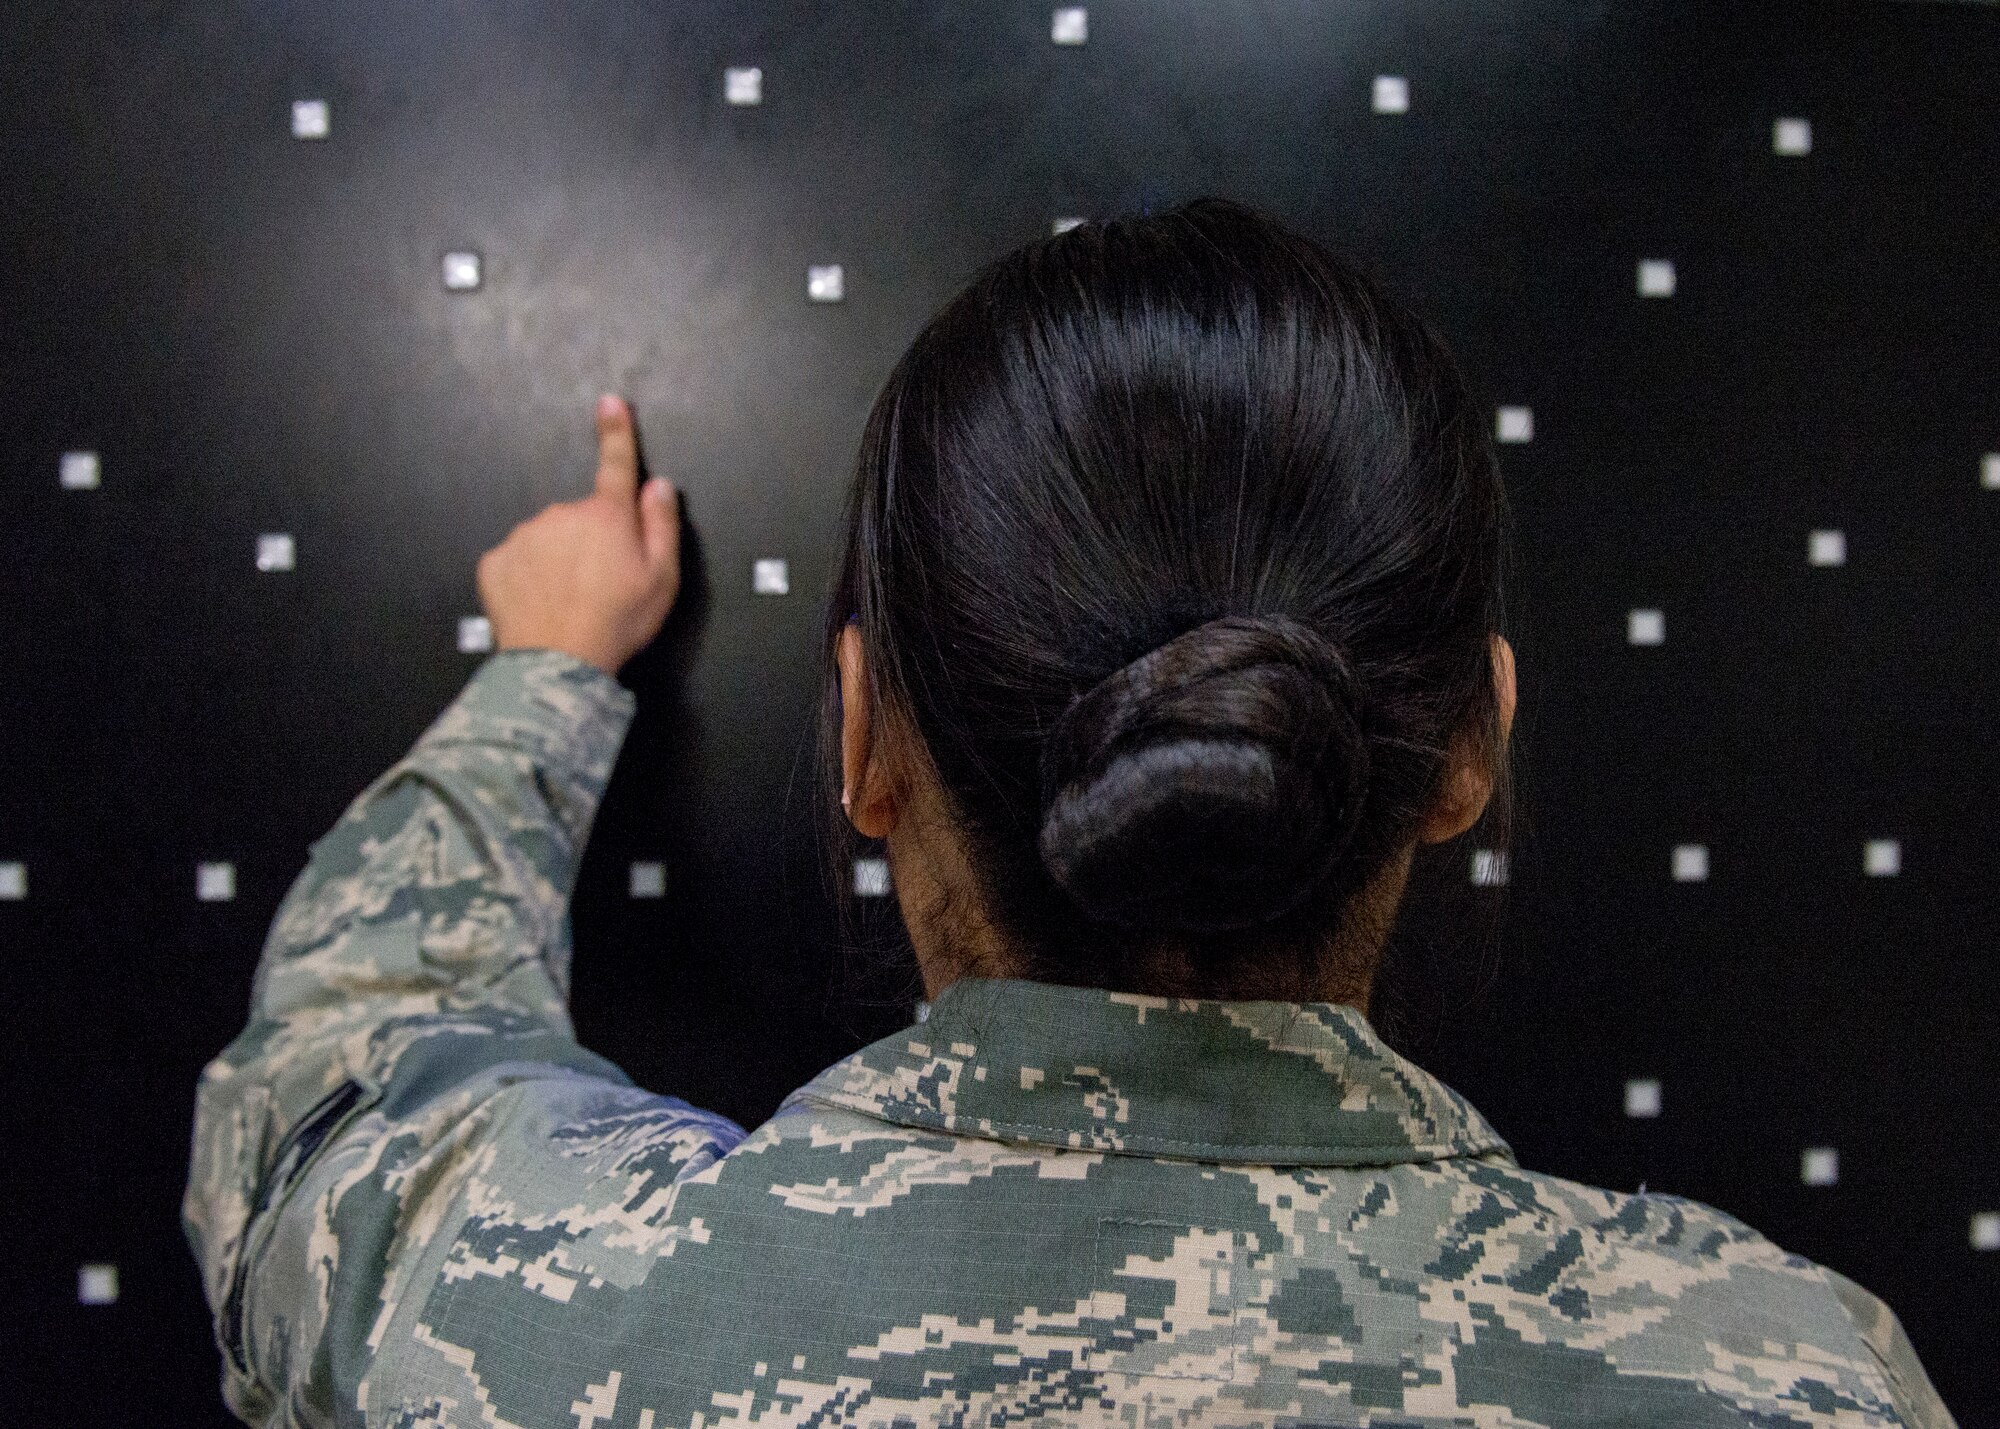 A patient participates in occupational rehabilitation offered through the Traumatic Brain Injury clinic at Joint Base Elmendorf-Richardson, Alaska, Feb. 26, 2018. The JBER hospital TBI clinic offers traditional medical therapies such as medication management, occupational therapy, speech therapy and psychotherapy.